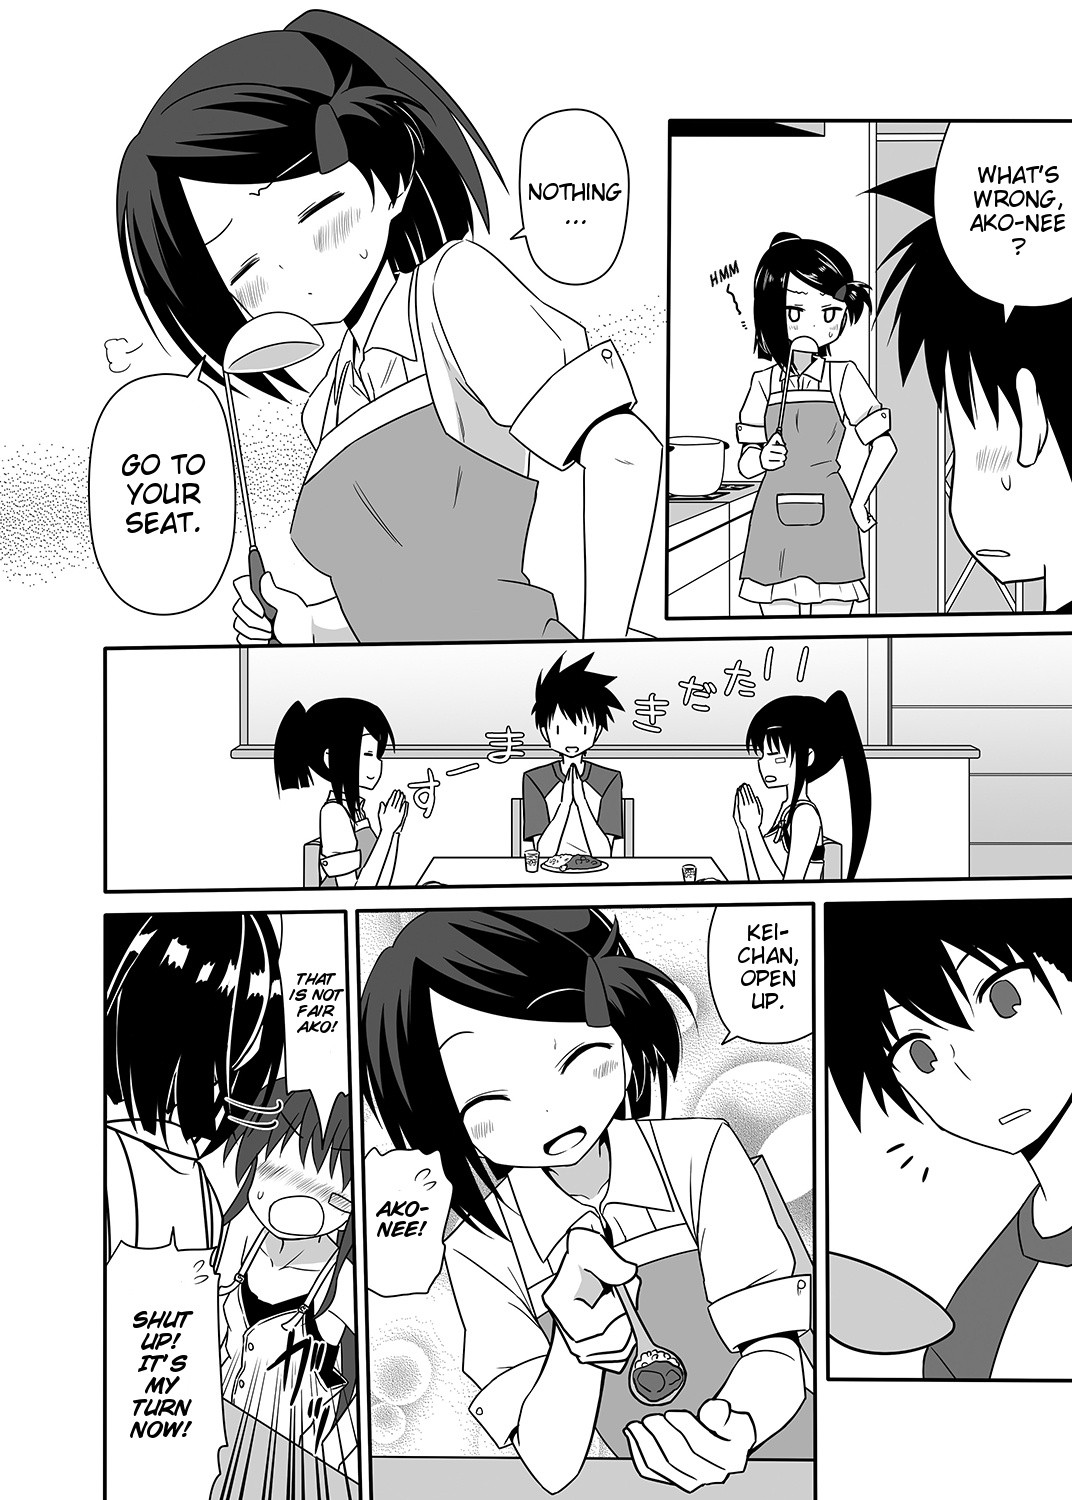 The day I went over the line with Ako-nee hentai manga picture 3